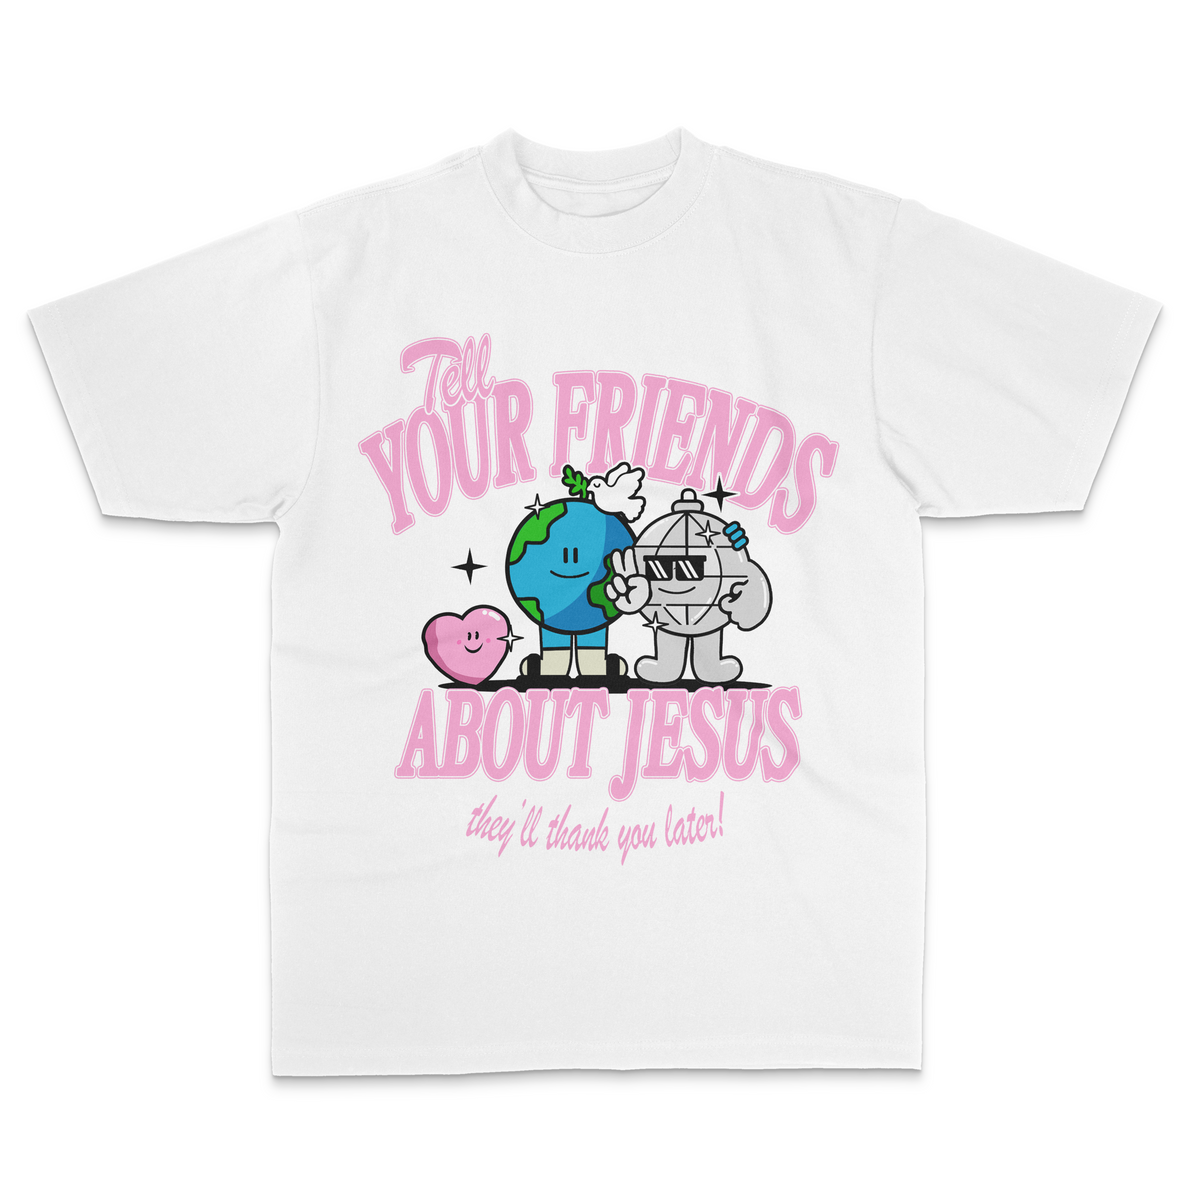 Tell Your Friends About Jesus - Pink Heart Edition